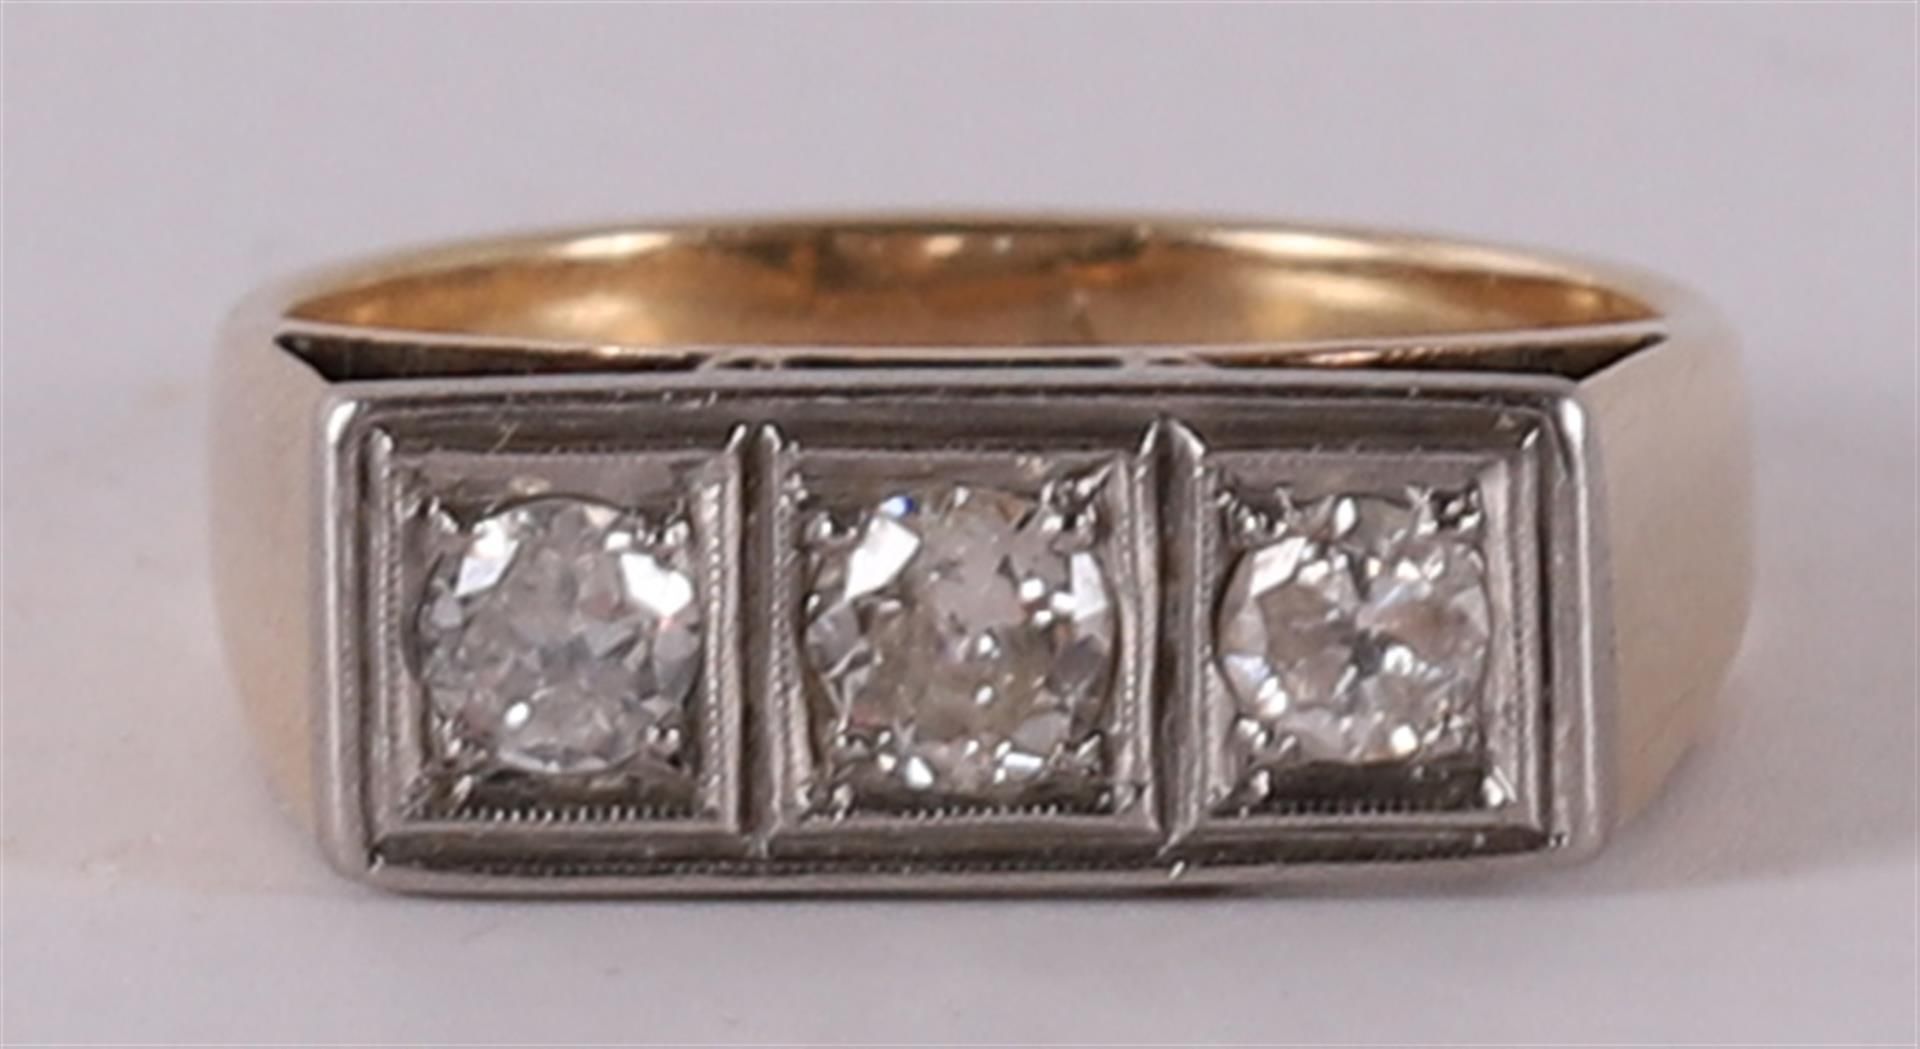 A 14 kt gold vintage men's ring with 3 diamonds.